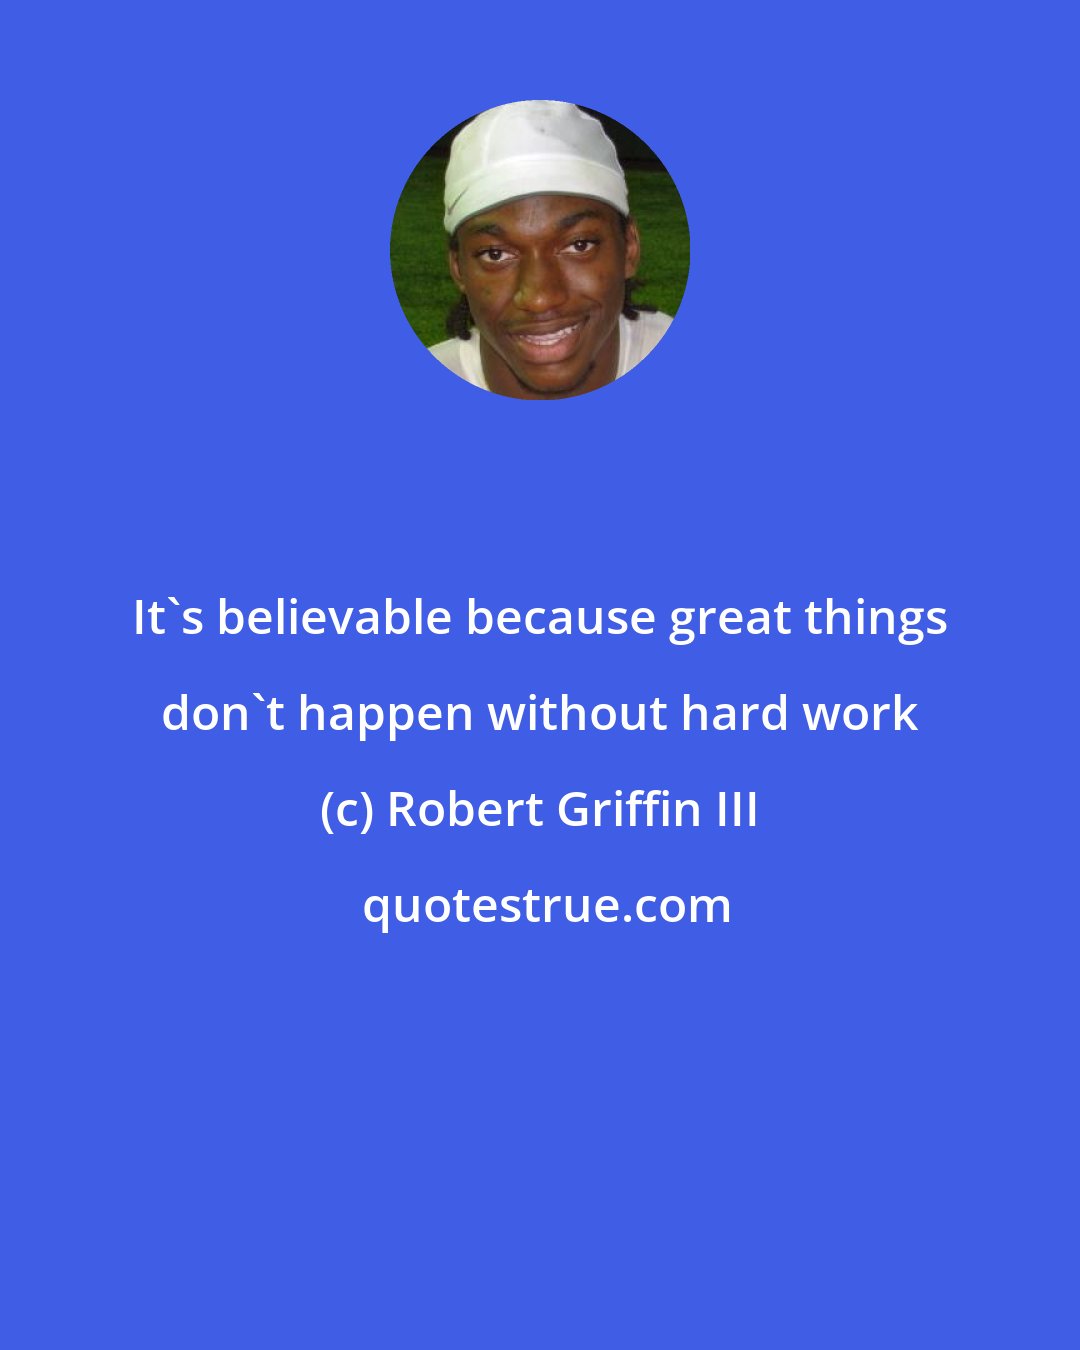 Robert Griffin III: It's believable because great things don't happen without hard work